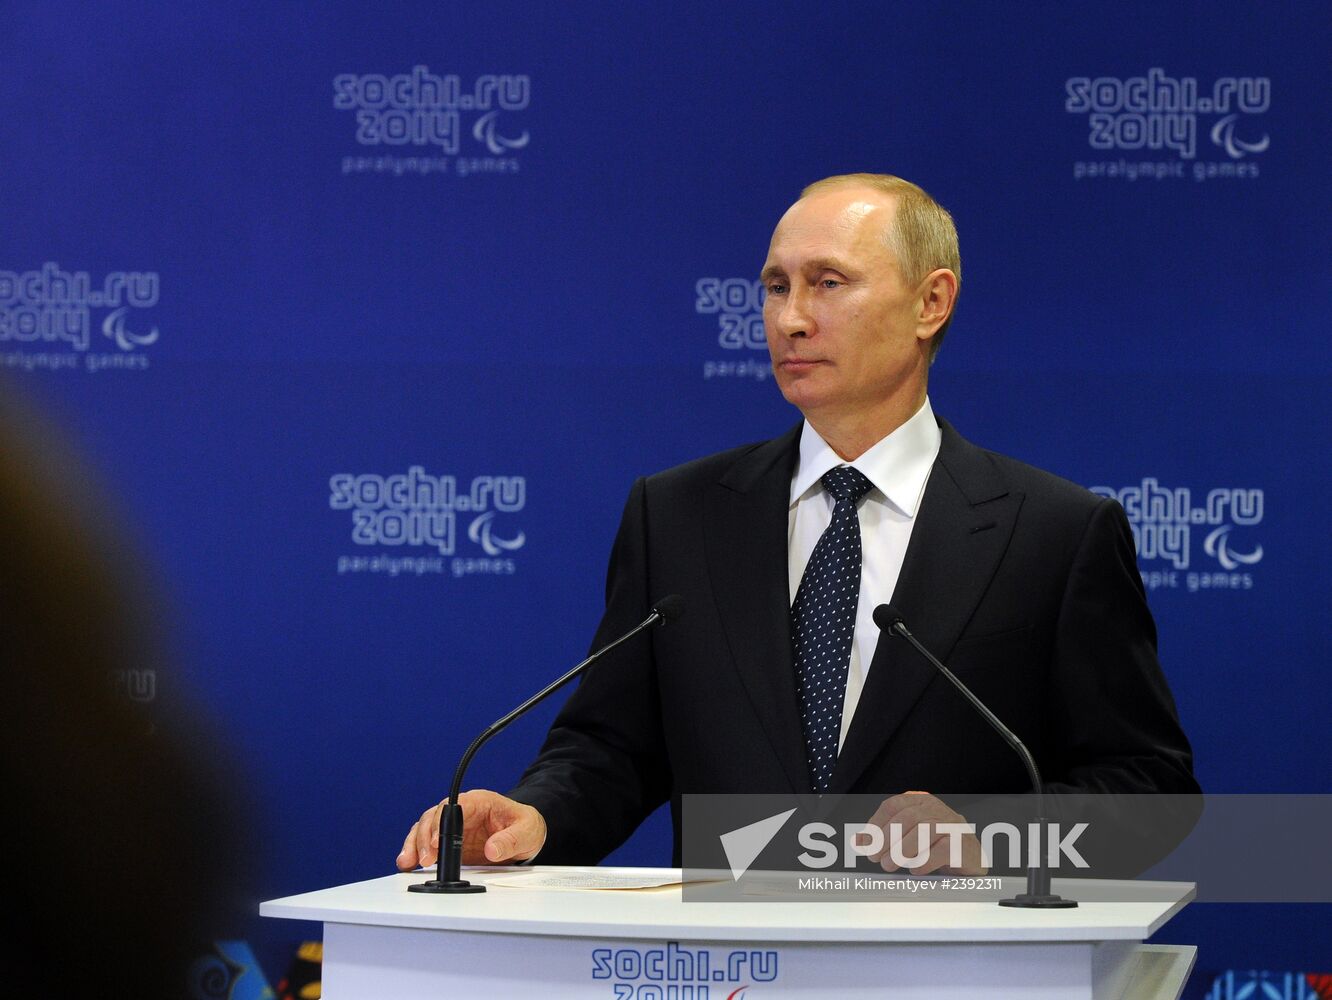 Putin meets with board members of International Paralympic Committee